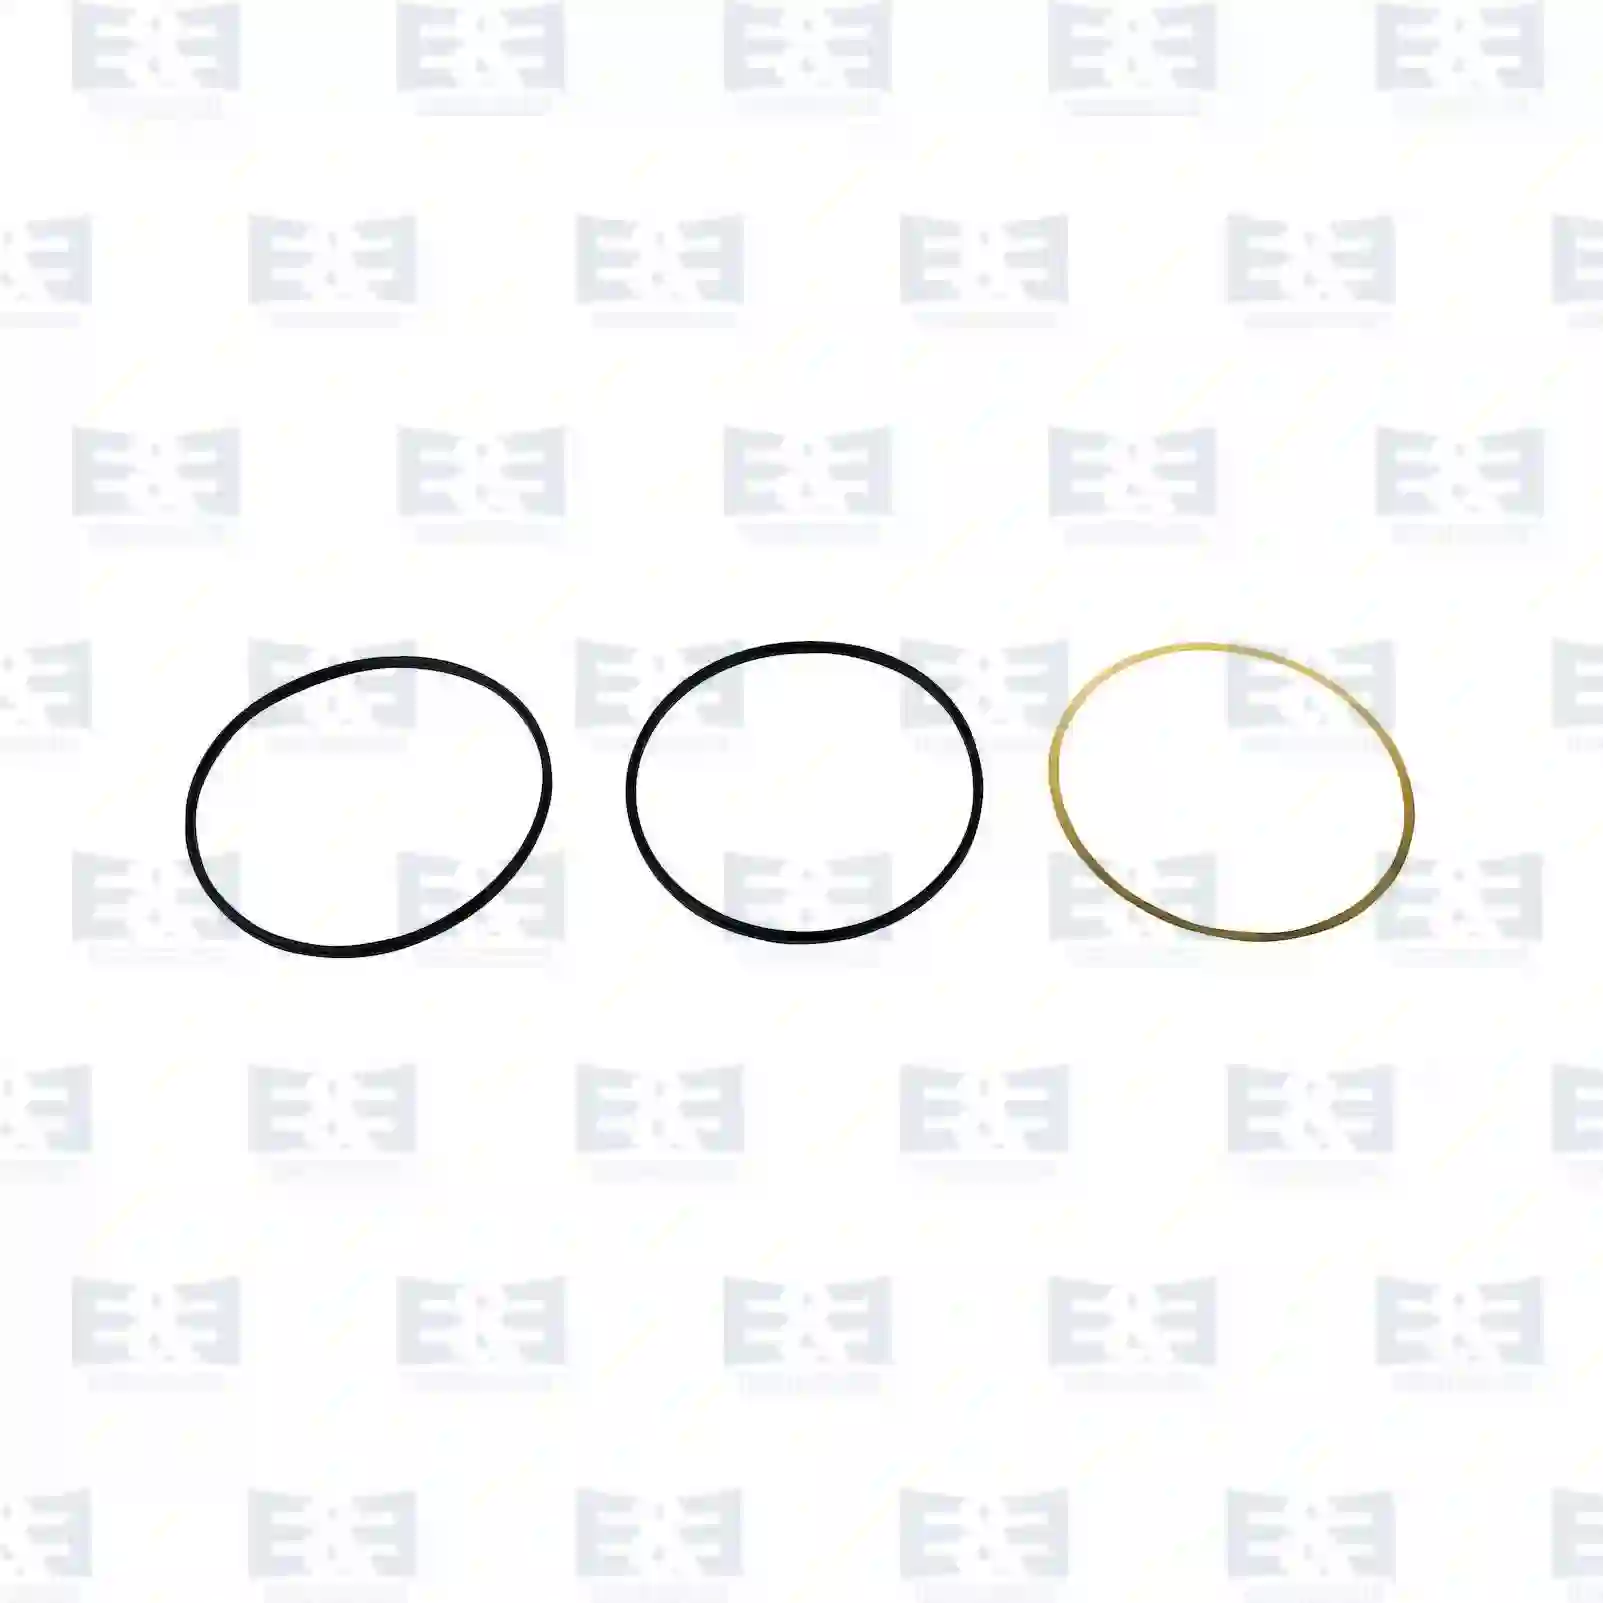 Seal ring kit, cylinder liner, 2E2208460, 5410110459S, 5419971845S ||  2E2208460 E&E Truck Spare Parts | Truck Spare Parts, Auotomotive Spare Parts Seal ring kit, cylinder liner, 2E2208460, 5410110459S, 5419971845S ||  2E2208460 E&E Truck Spare Parts | Truck Spare Parts, Auotomotive Spare Parts